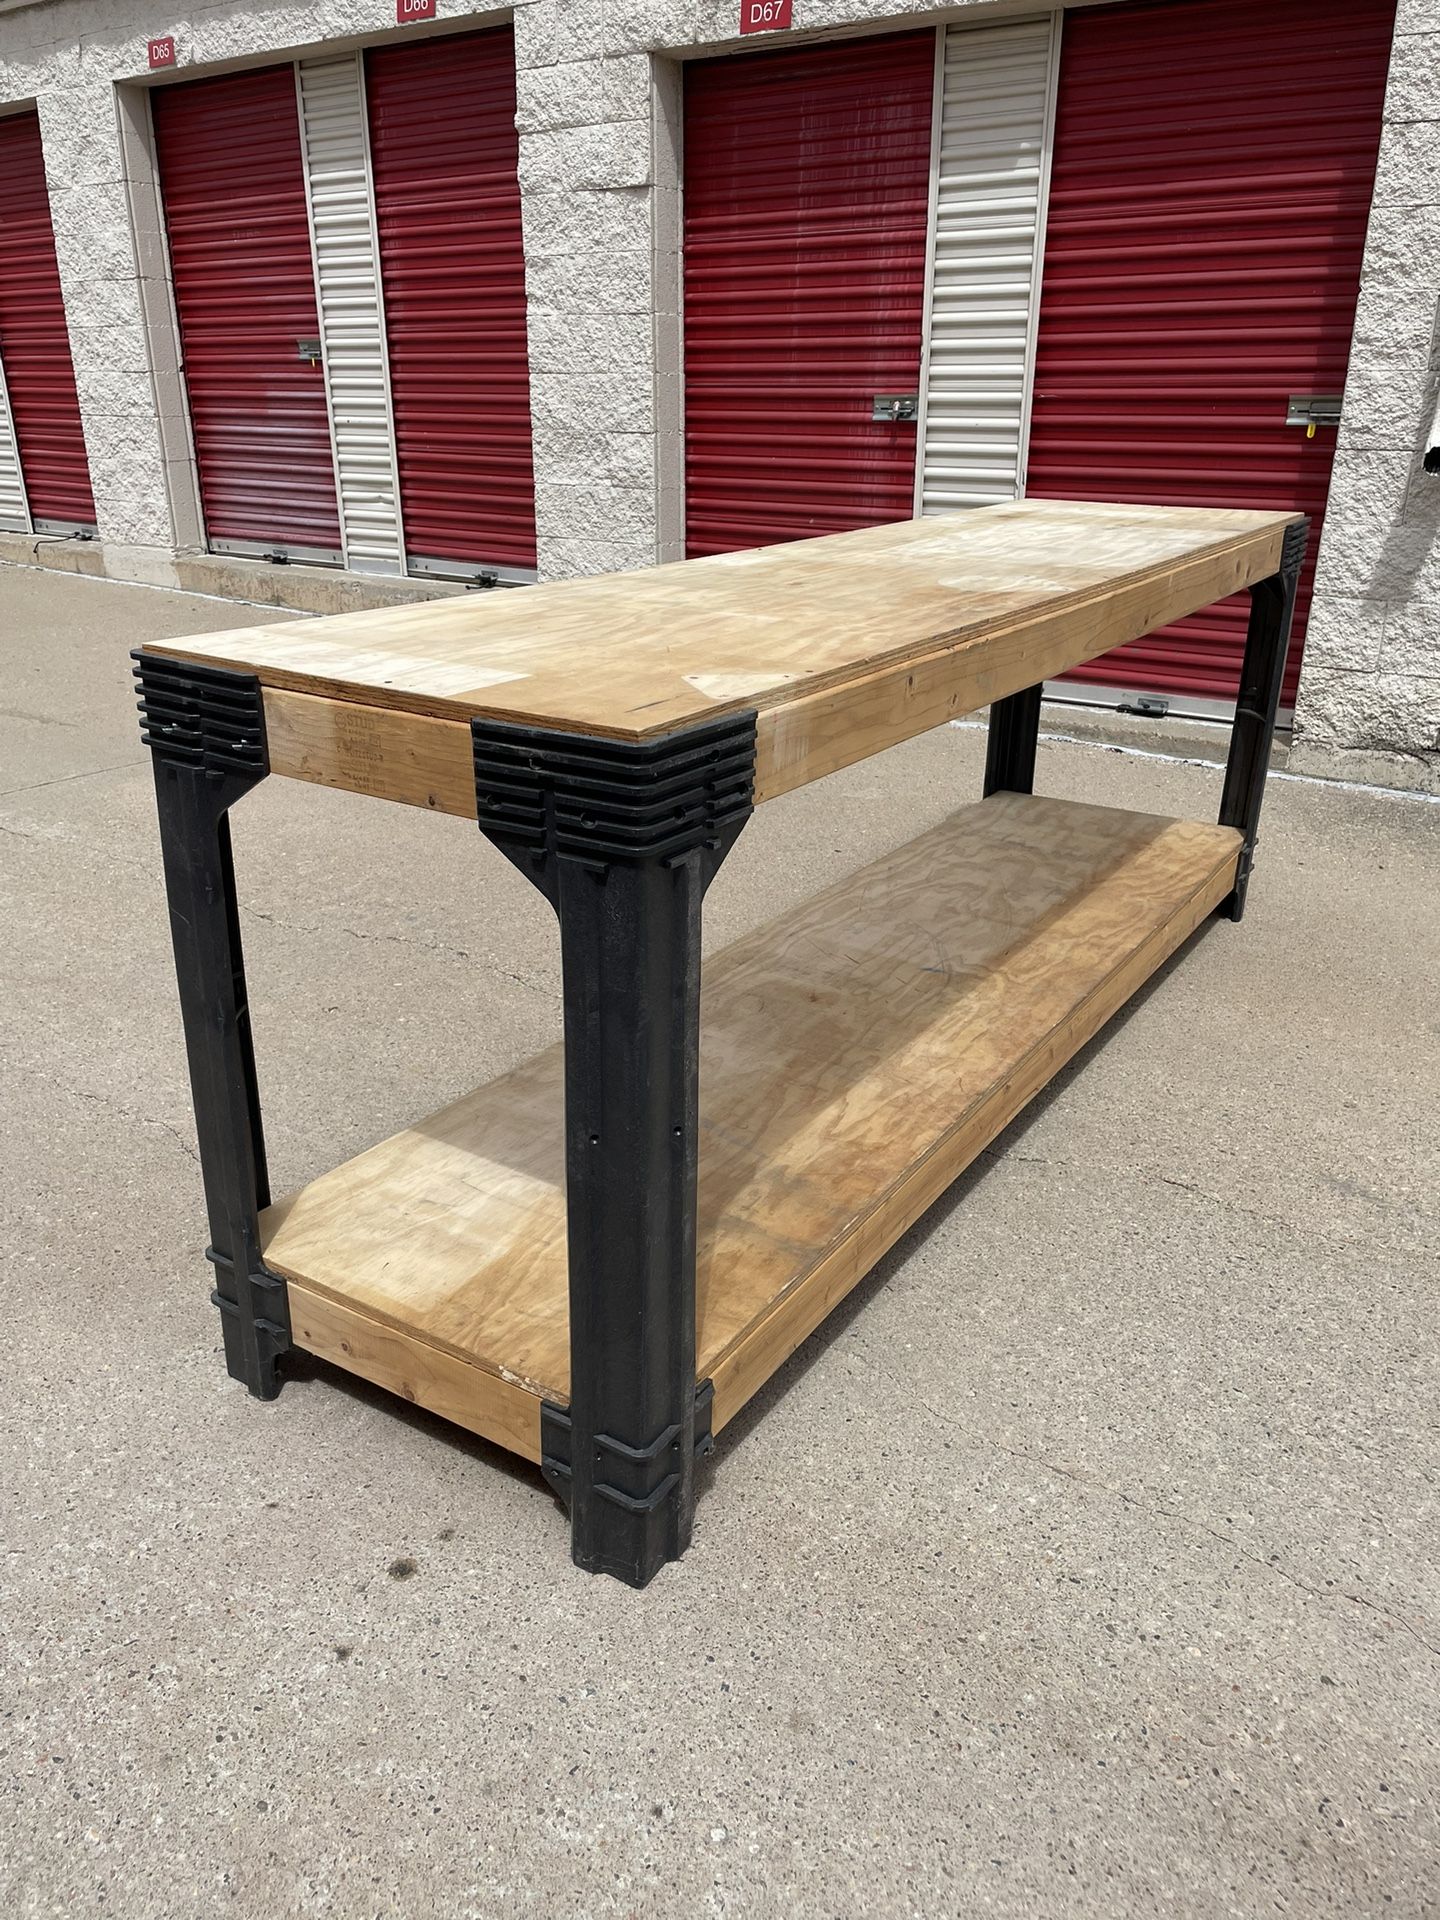 Plywood Workbench for Garage or Shed